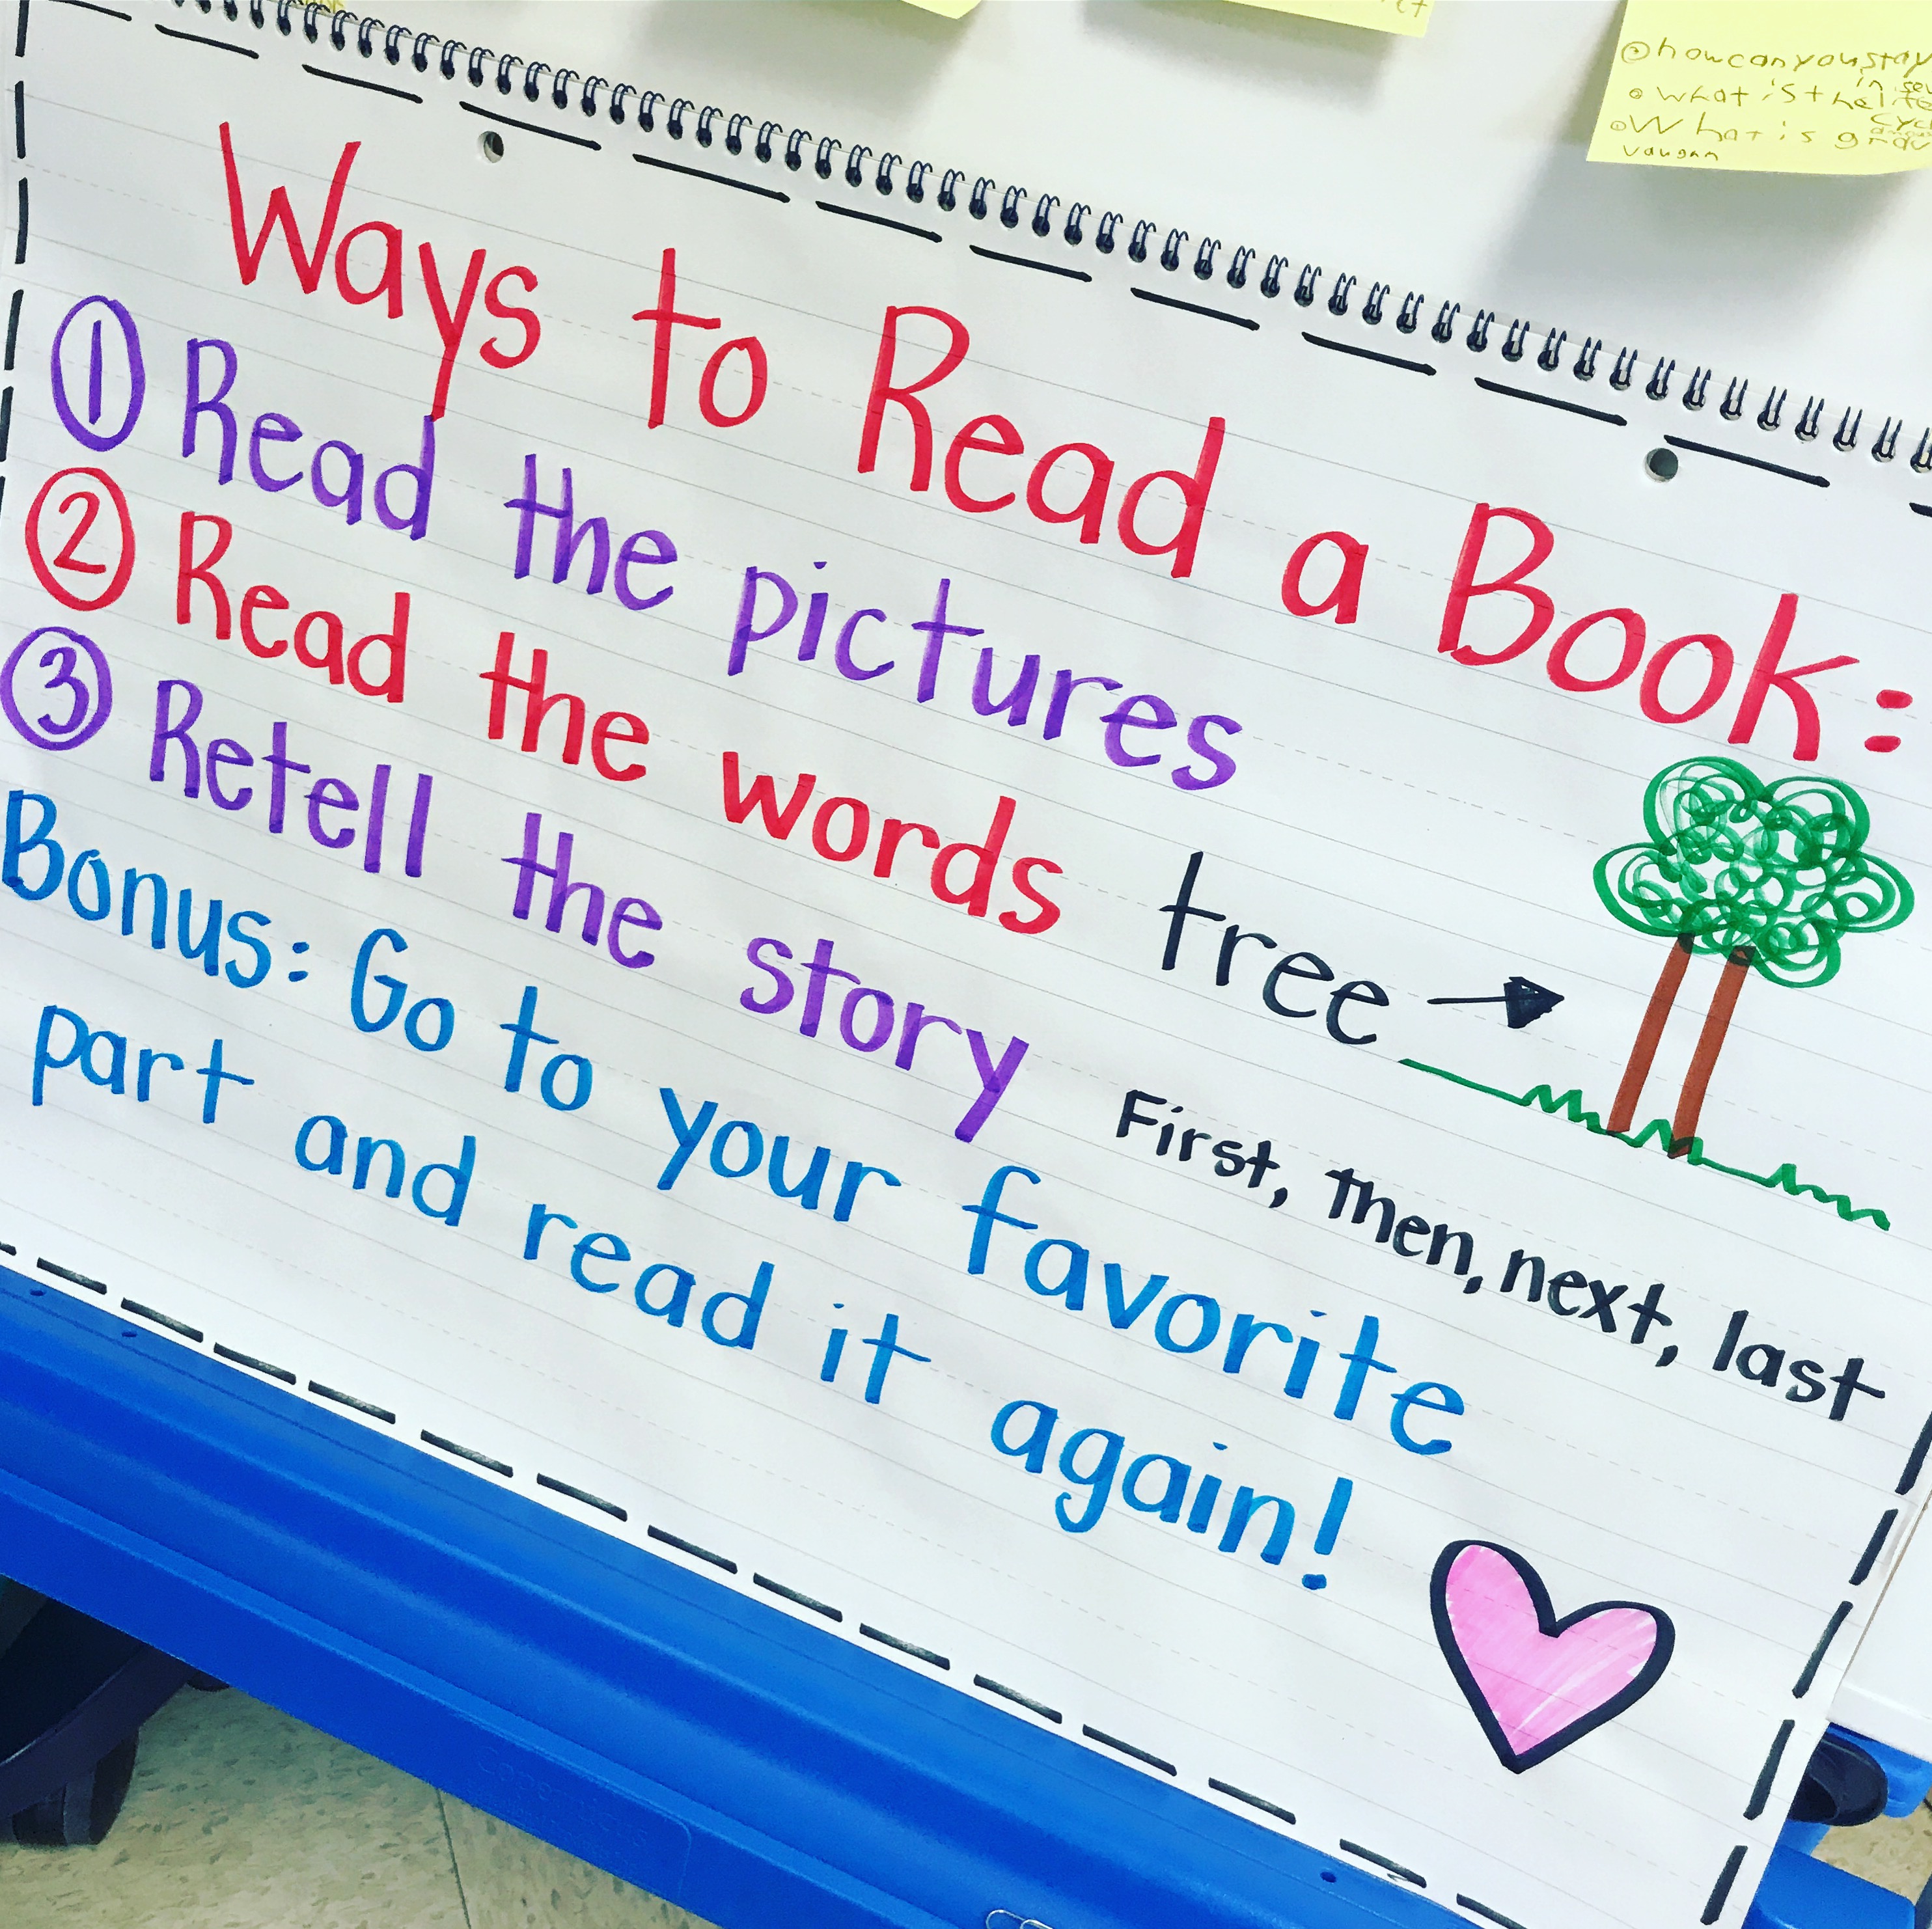 Anchor Charts For First Grade Reading Workshop